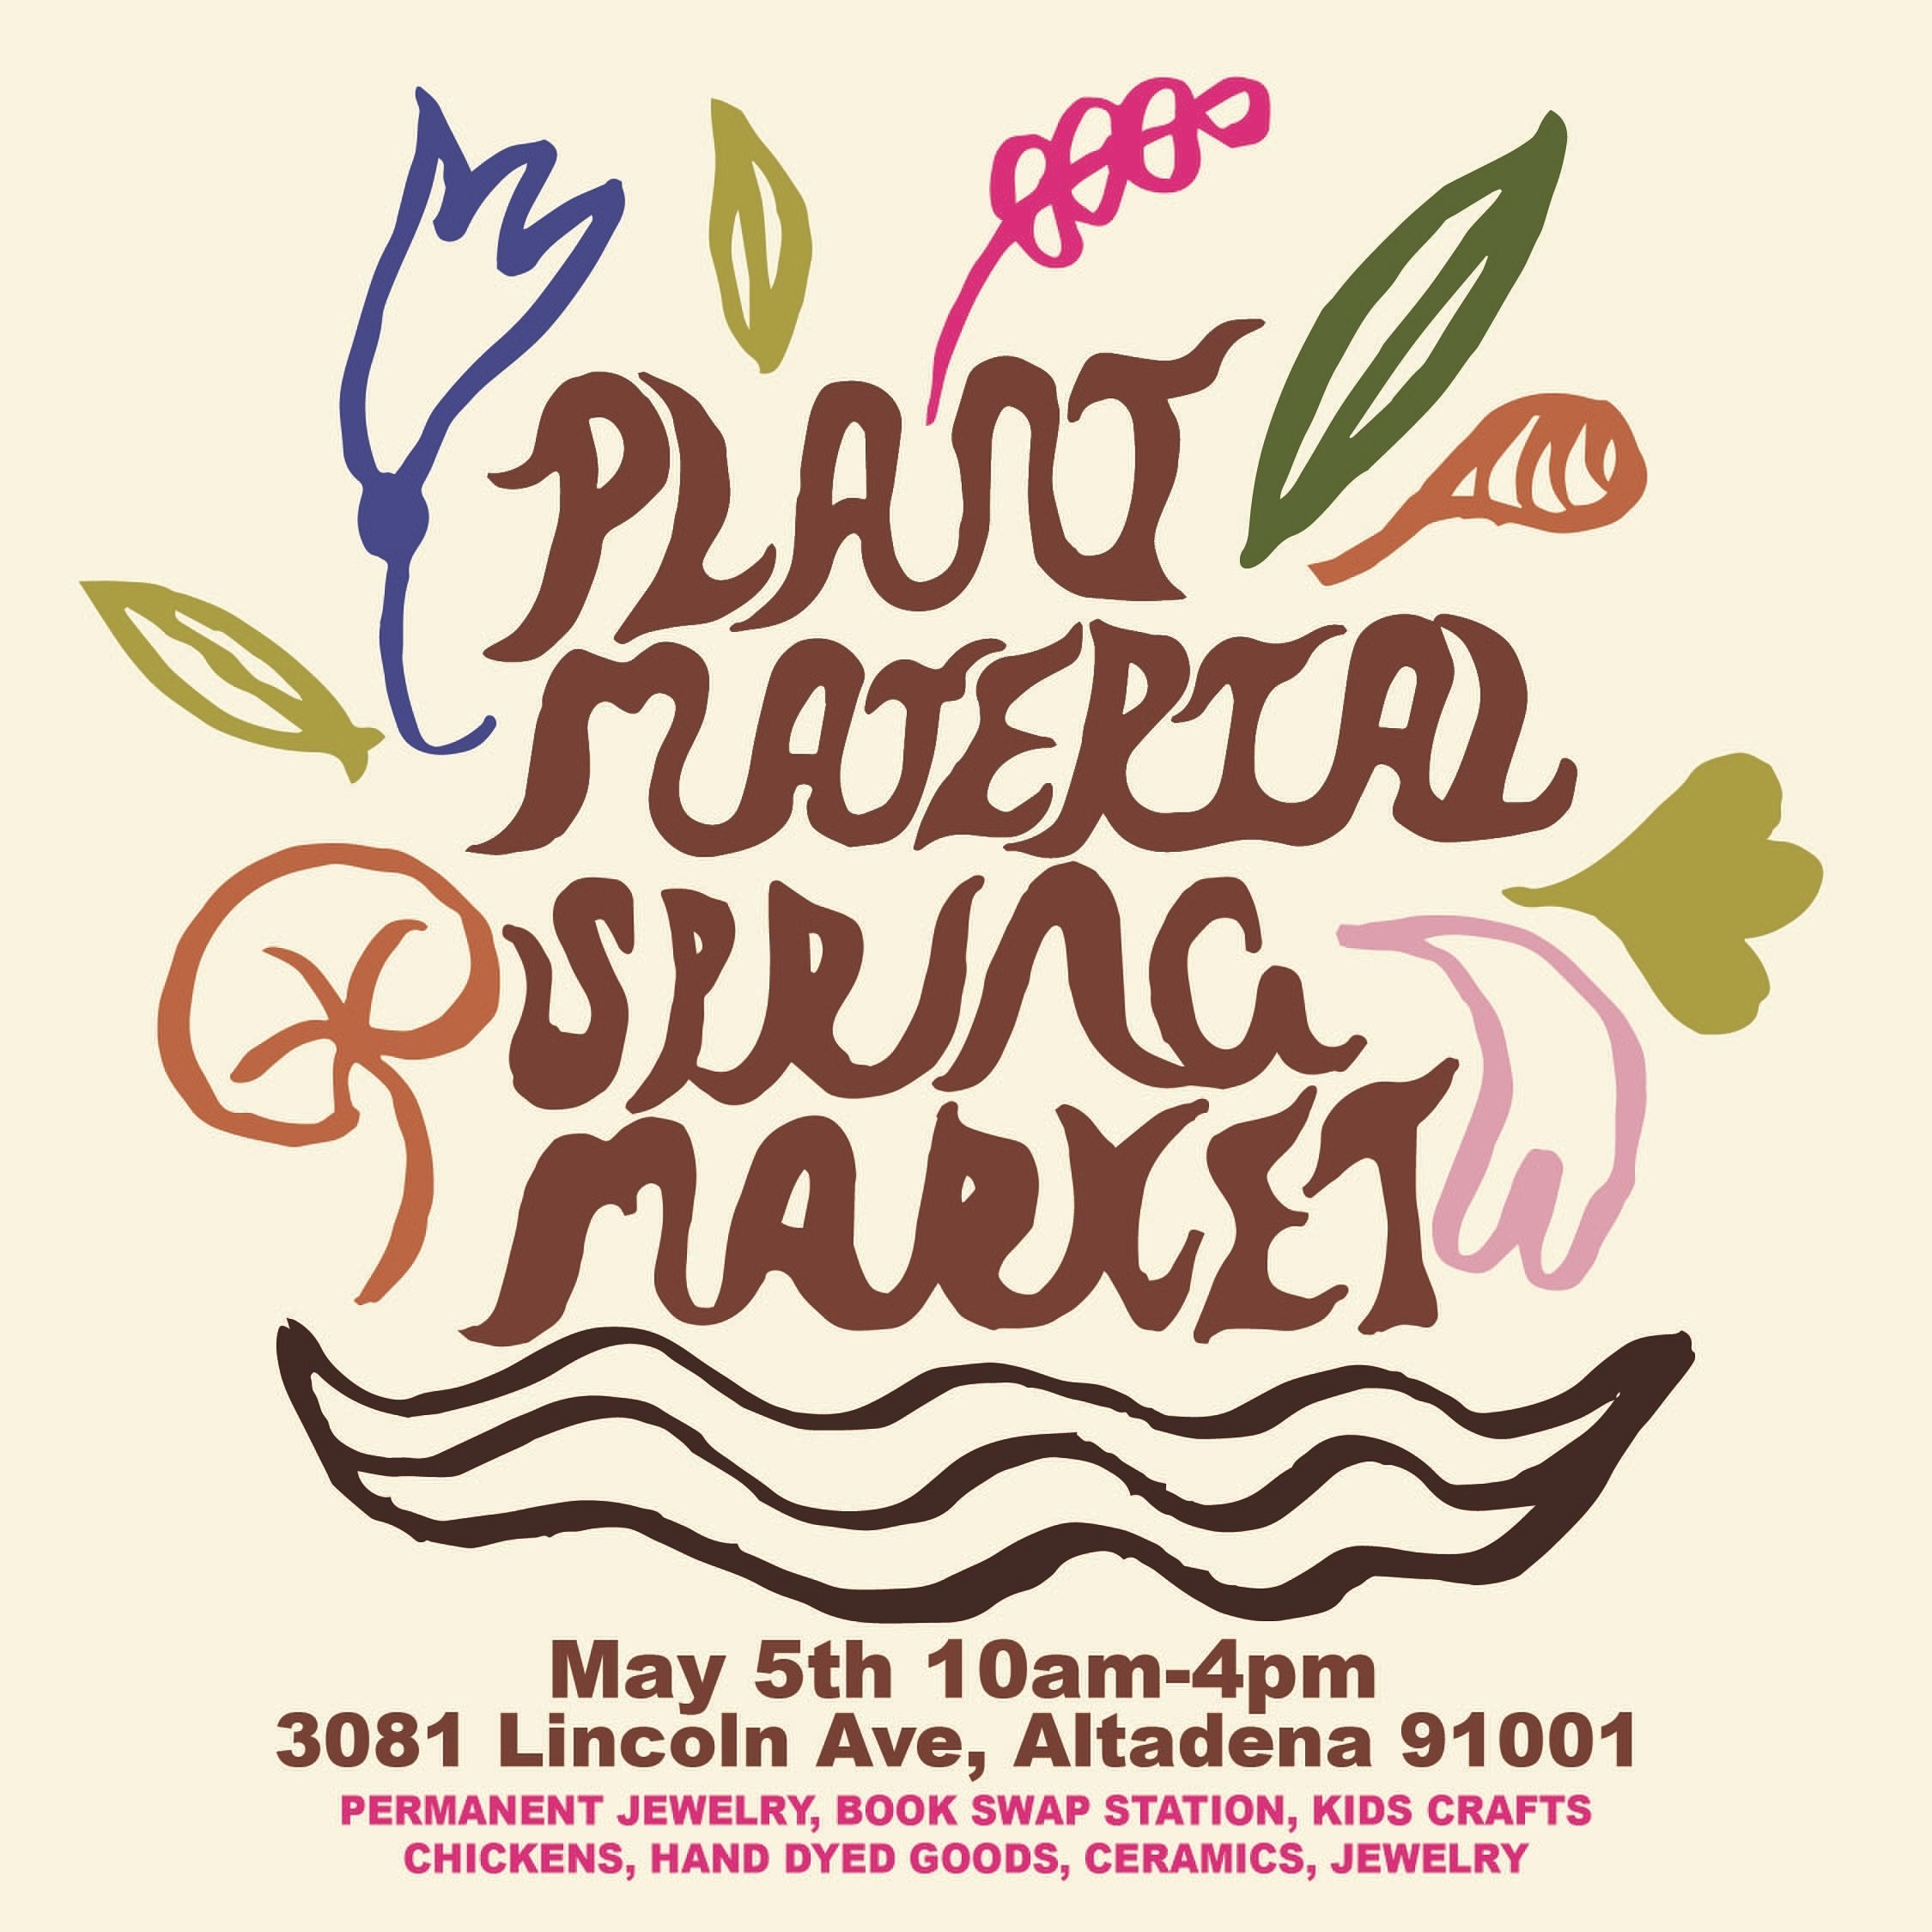 We&rsquo;re excited to be sponsoring this Plant Material Spring Market! Check it out May 5th!
10am-4pm
3081 Lincoln Ave. Altadena, CA 91001
&bull; &bull; &bull;
#plantmaterialsmarket #makermarket #remainders #remainderscreativereuse #remainderspasade